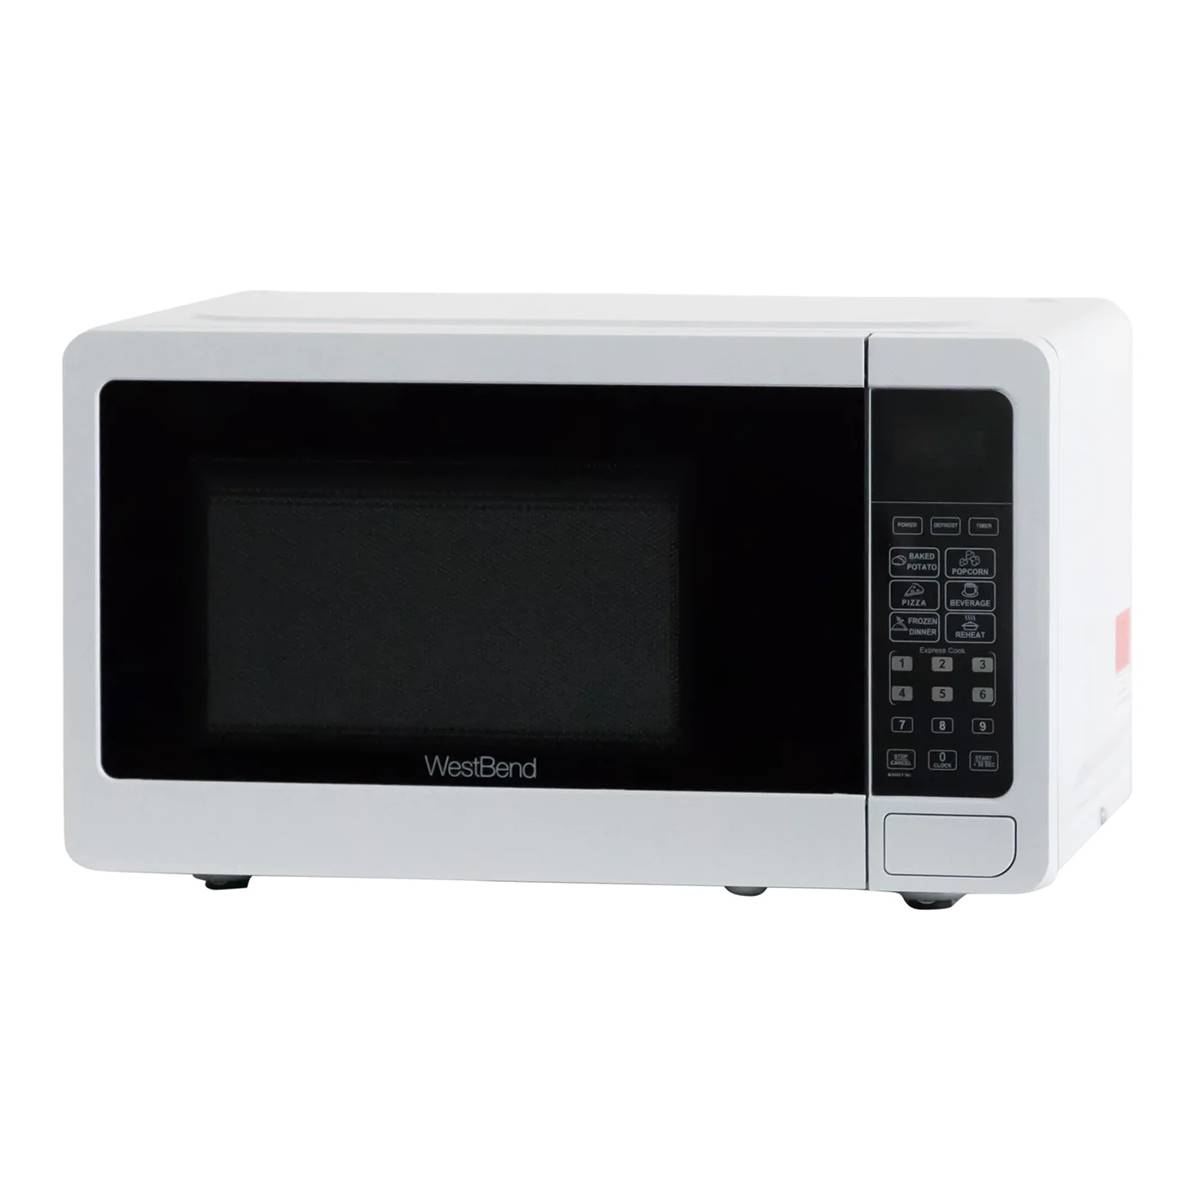 West Bend 0.7 Cu. Ft. Microwave - White